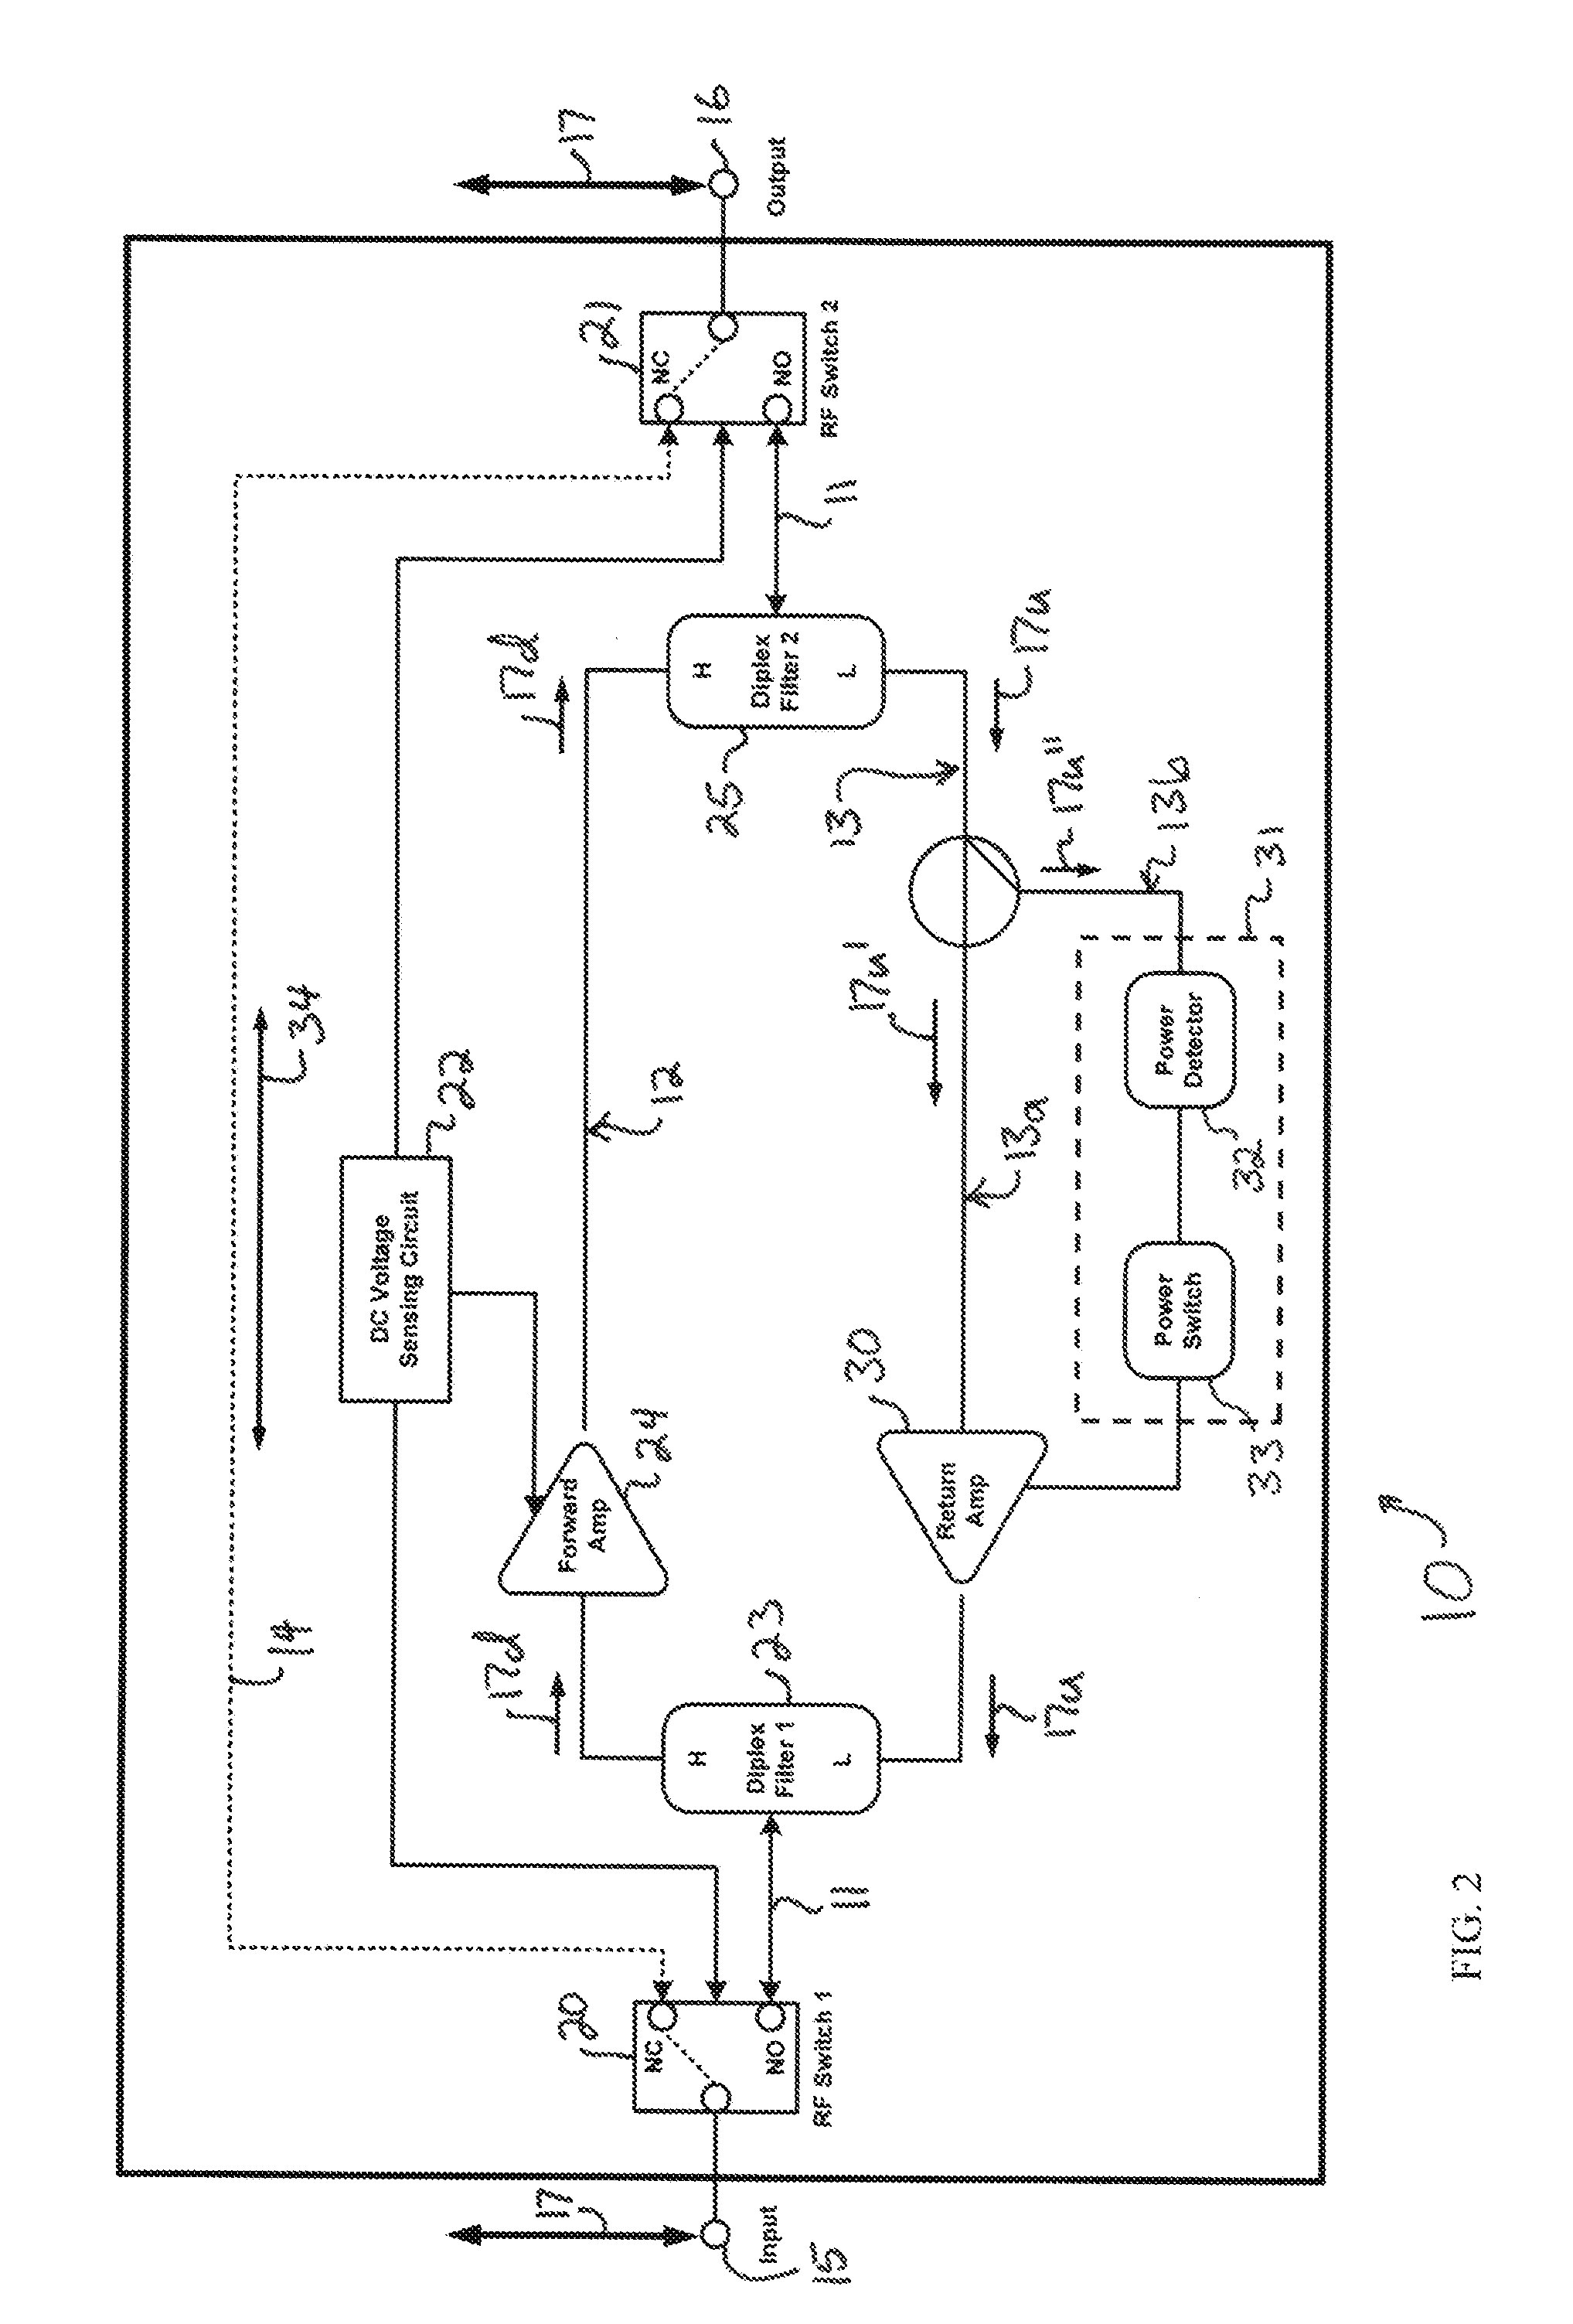 Return Path Noise Reducing Amplifier with Bypass Signal